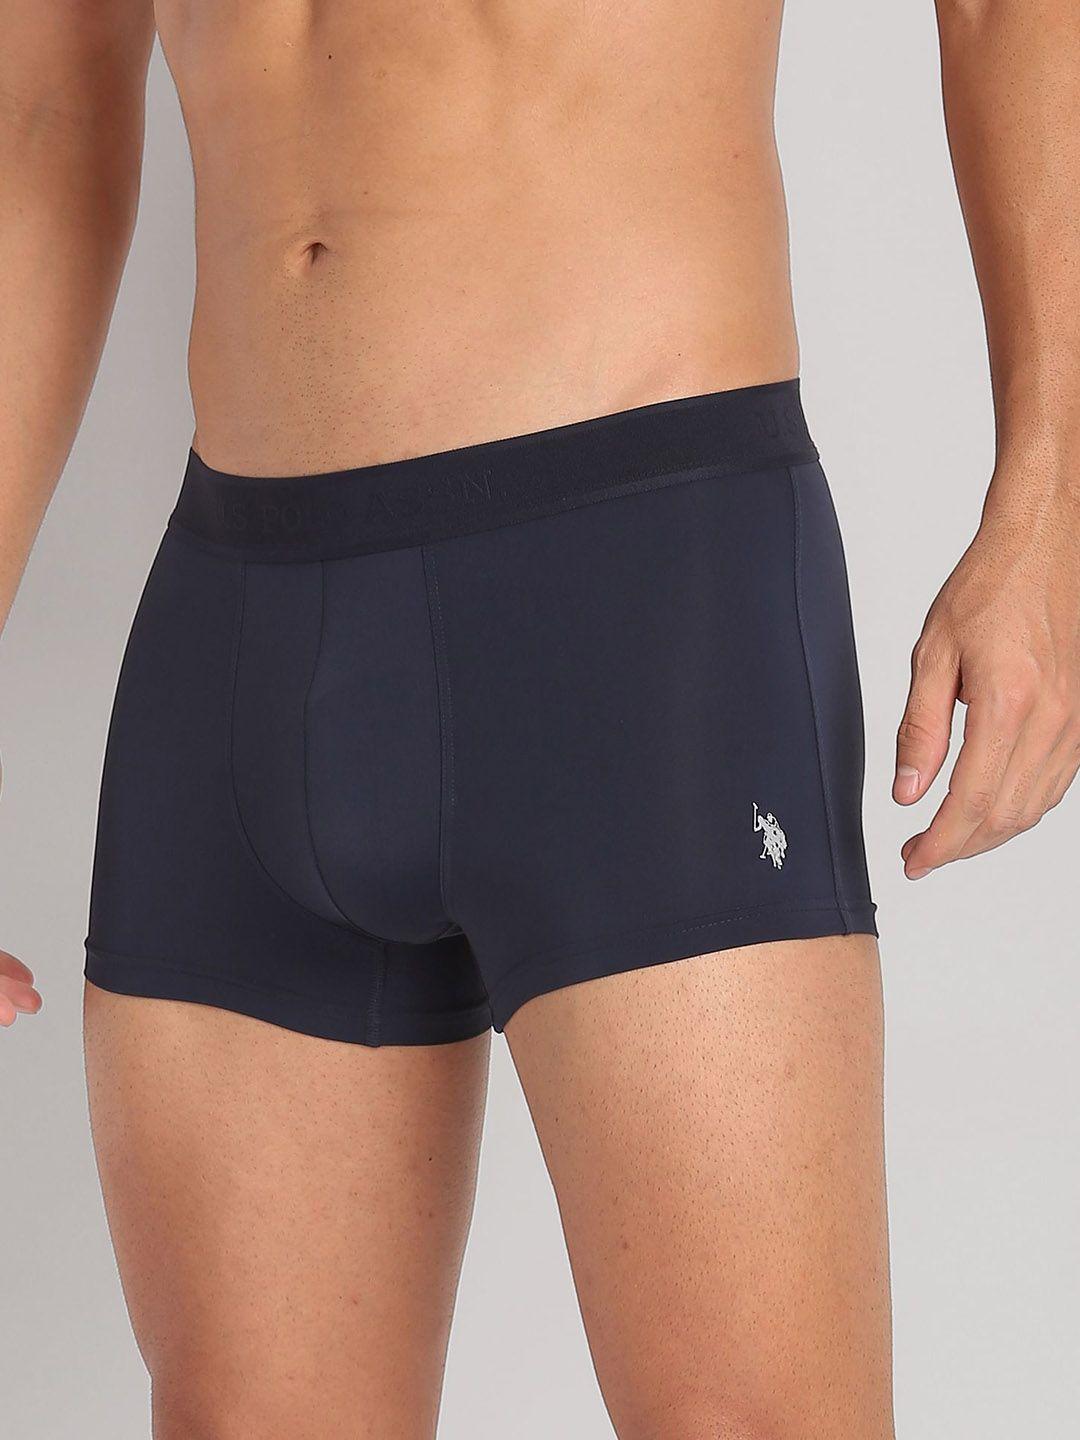 u.s. polo assn. men moisture wicking stretchable trunk